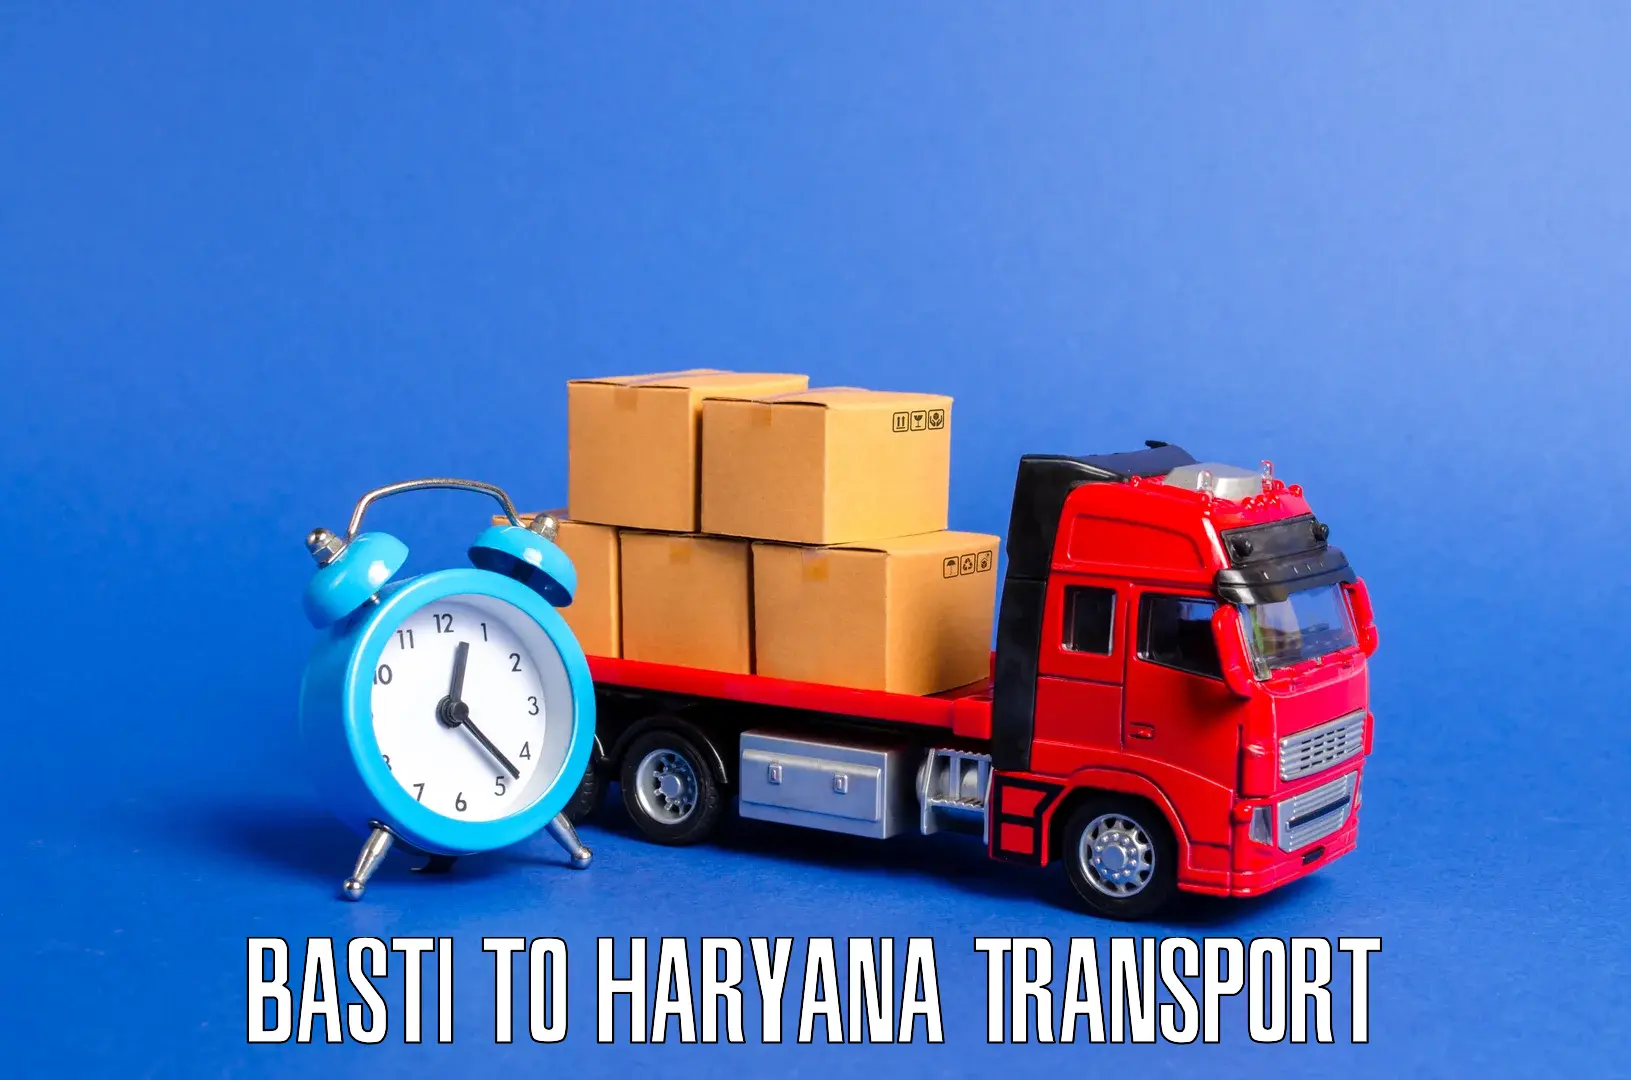 Vehicle transport services in Basti to Hisar